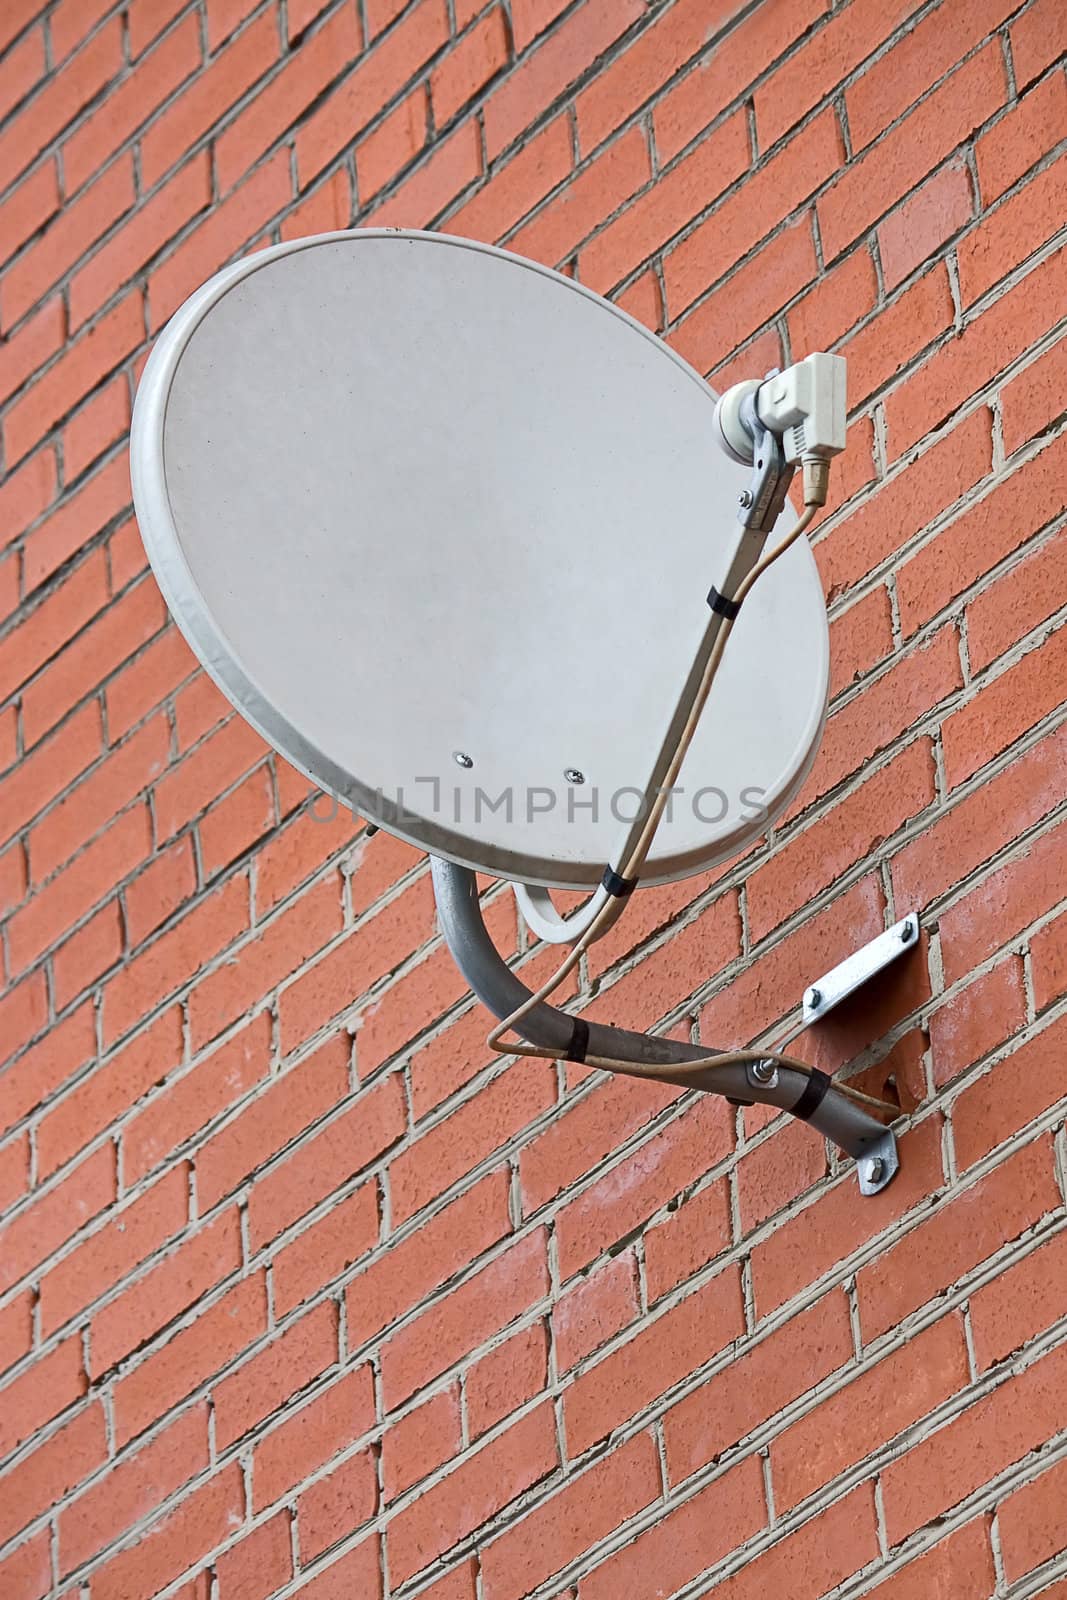 Television satellite dish against a brick wall.